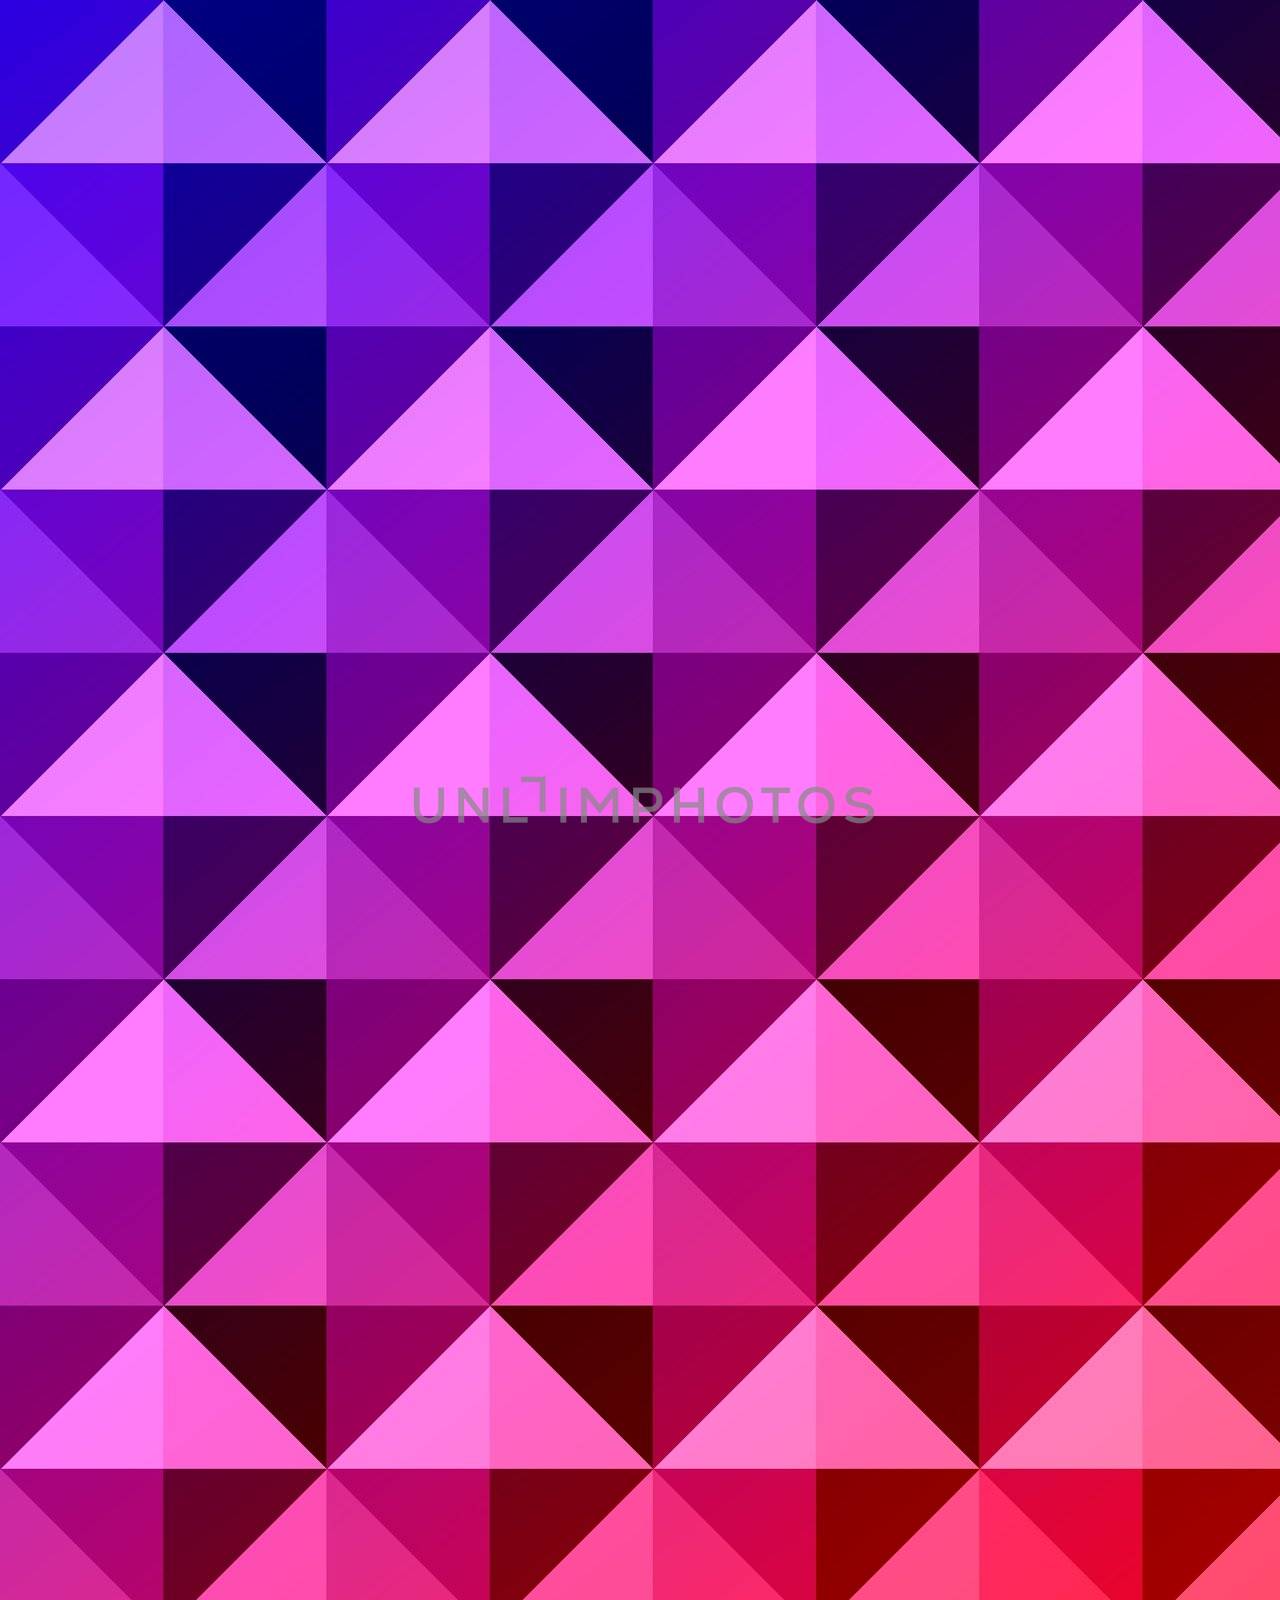 triangle background, rembering the design of the seventies/eighties